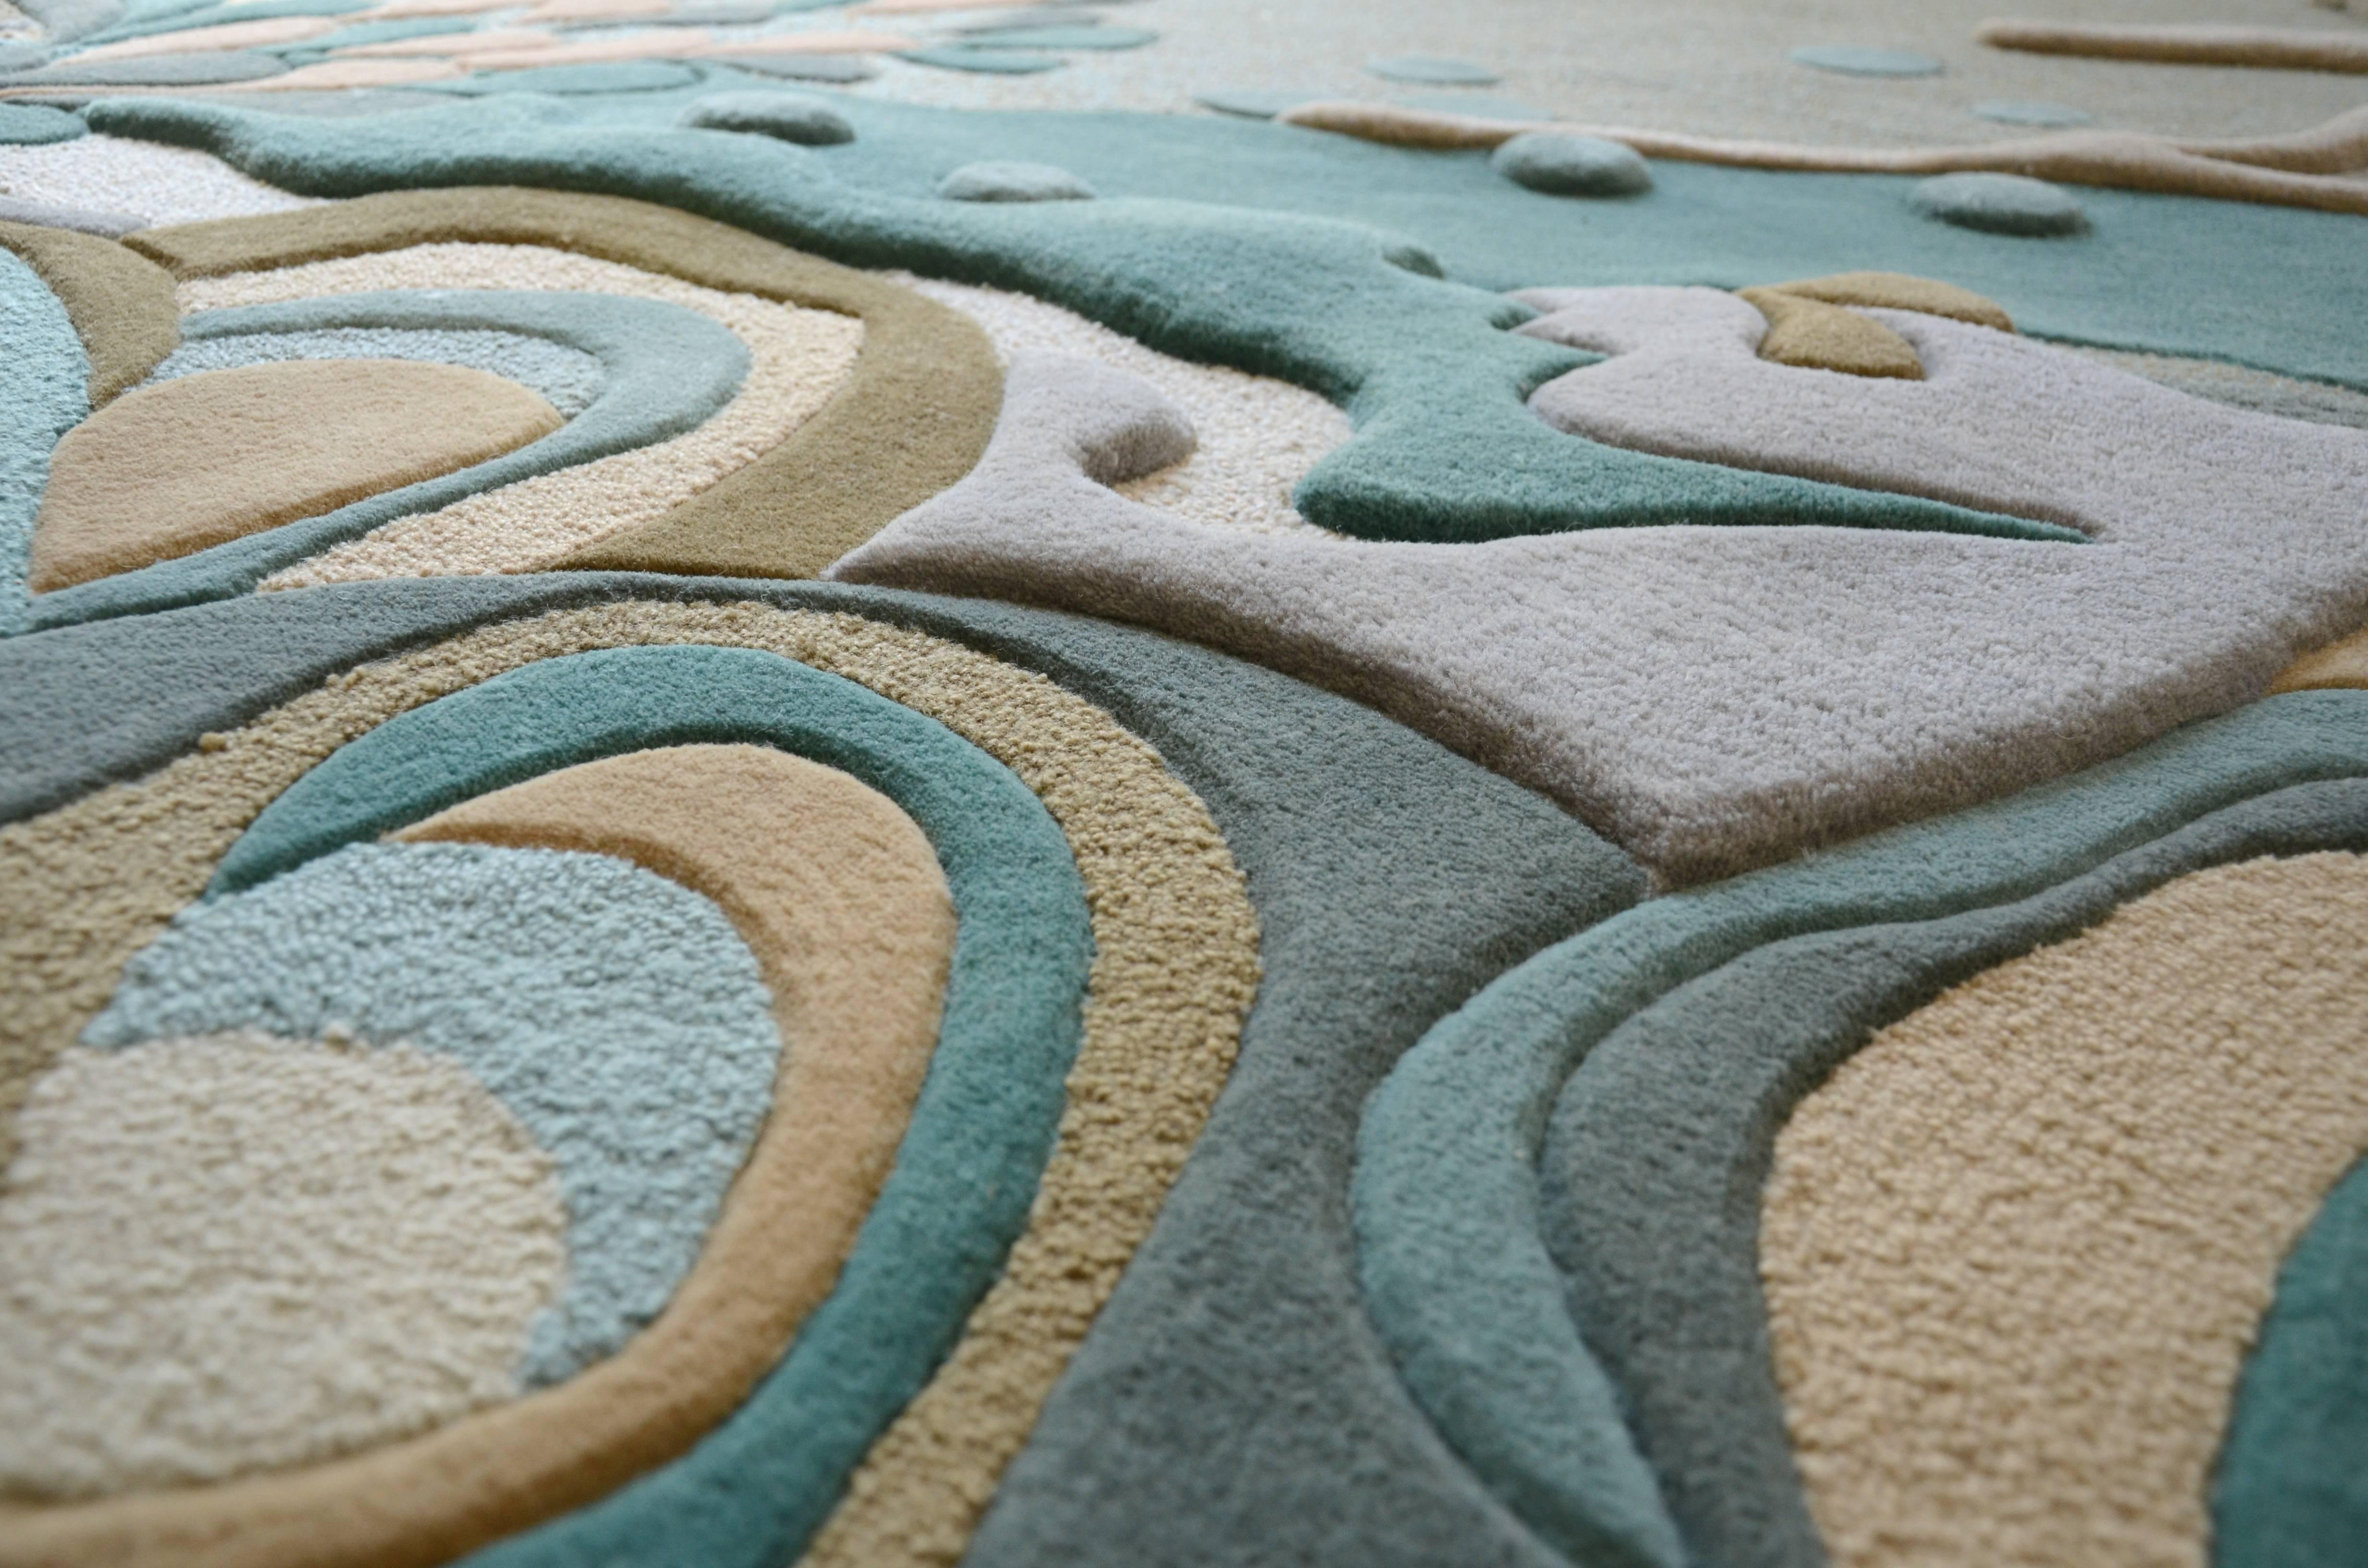 Angela Adams Dune, Blue Rug, Coastal, Natural Edge, Wool, Handcrafted, Modern In New Condition For Sale In Portland, ME